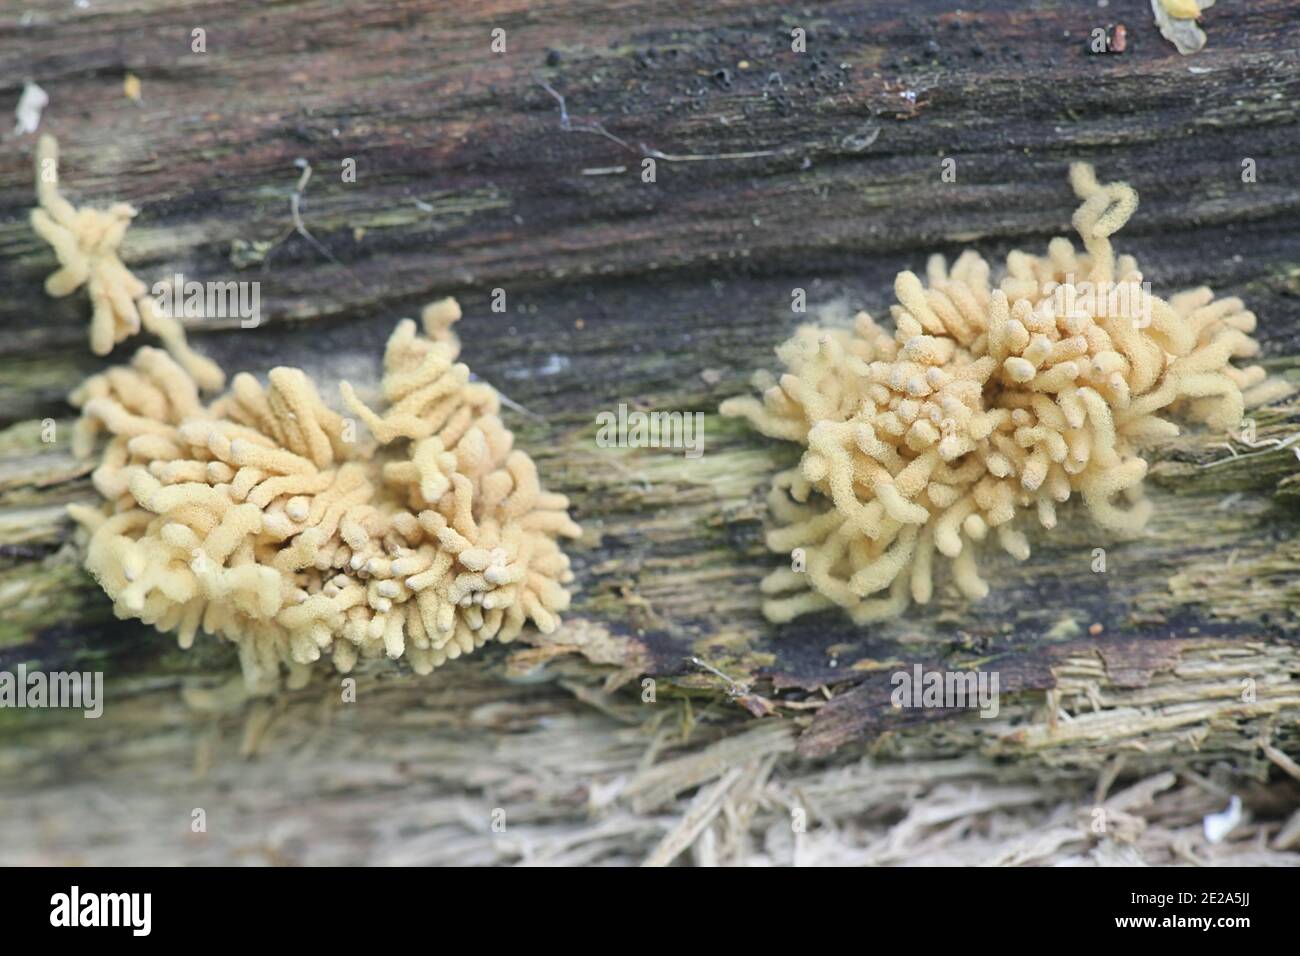 Arcyria obvelata (prev. Arcyria nutans), a species of slime mold in the family Trichiidae photographed in Finland, no common english name Stock Photo